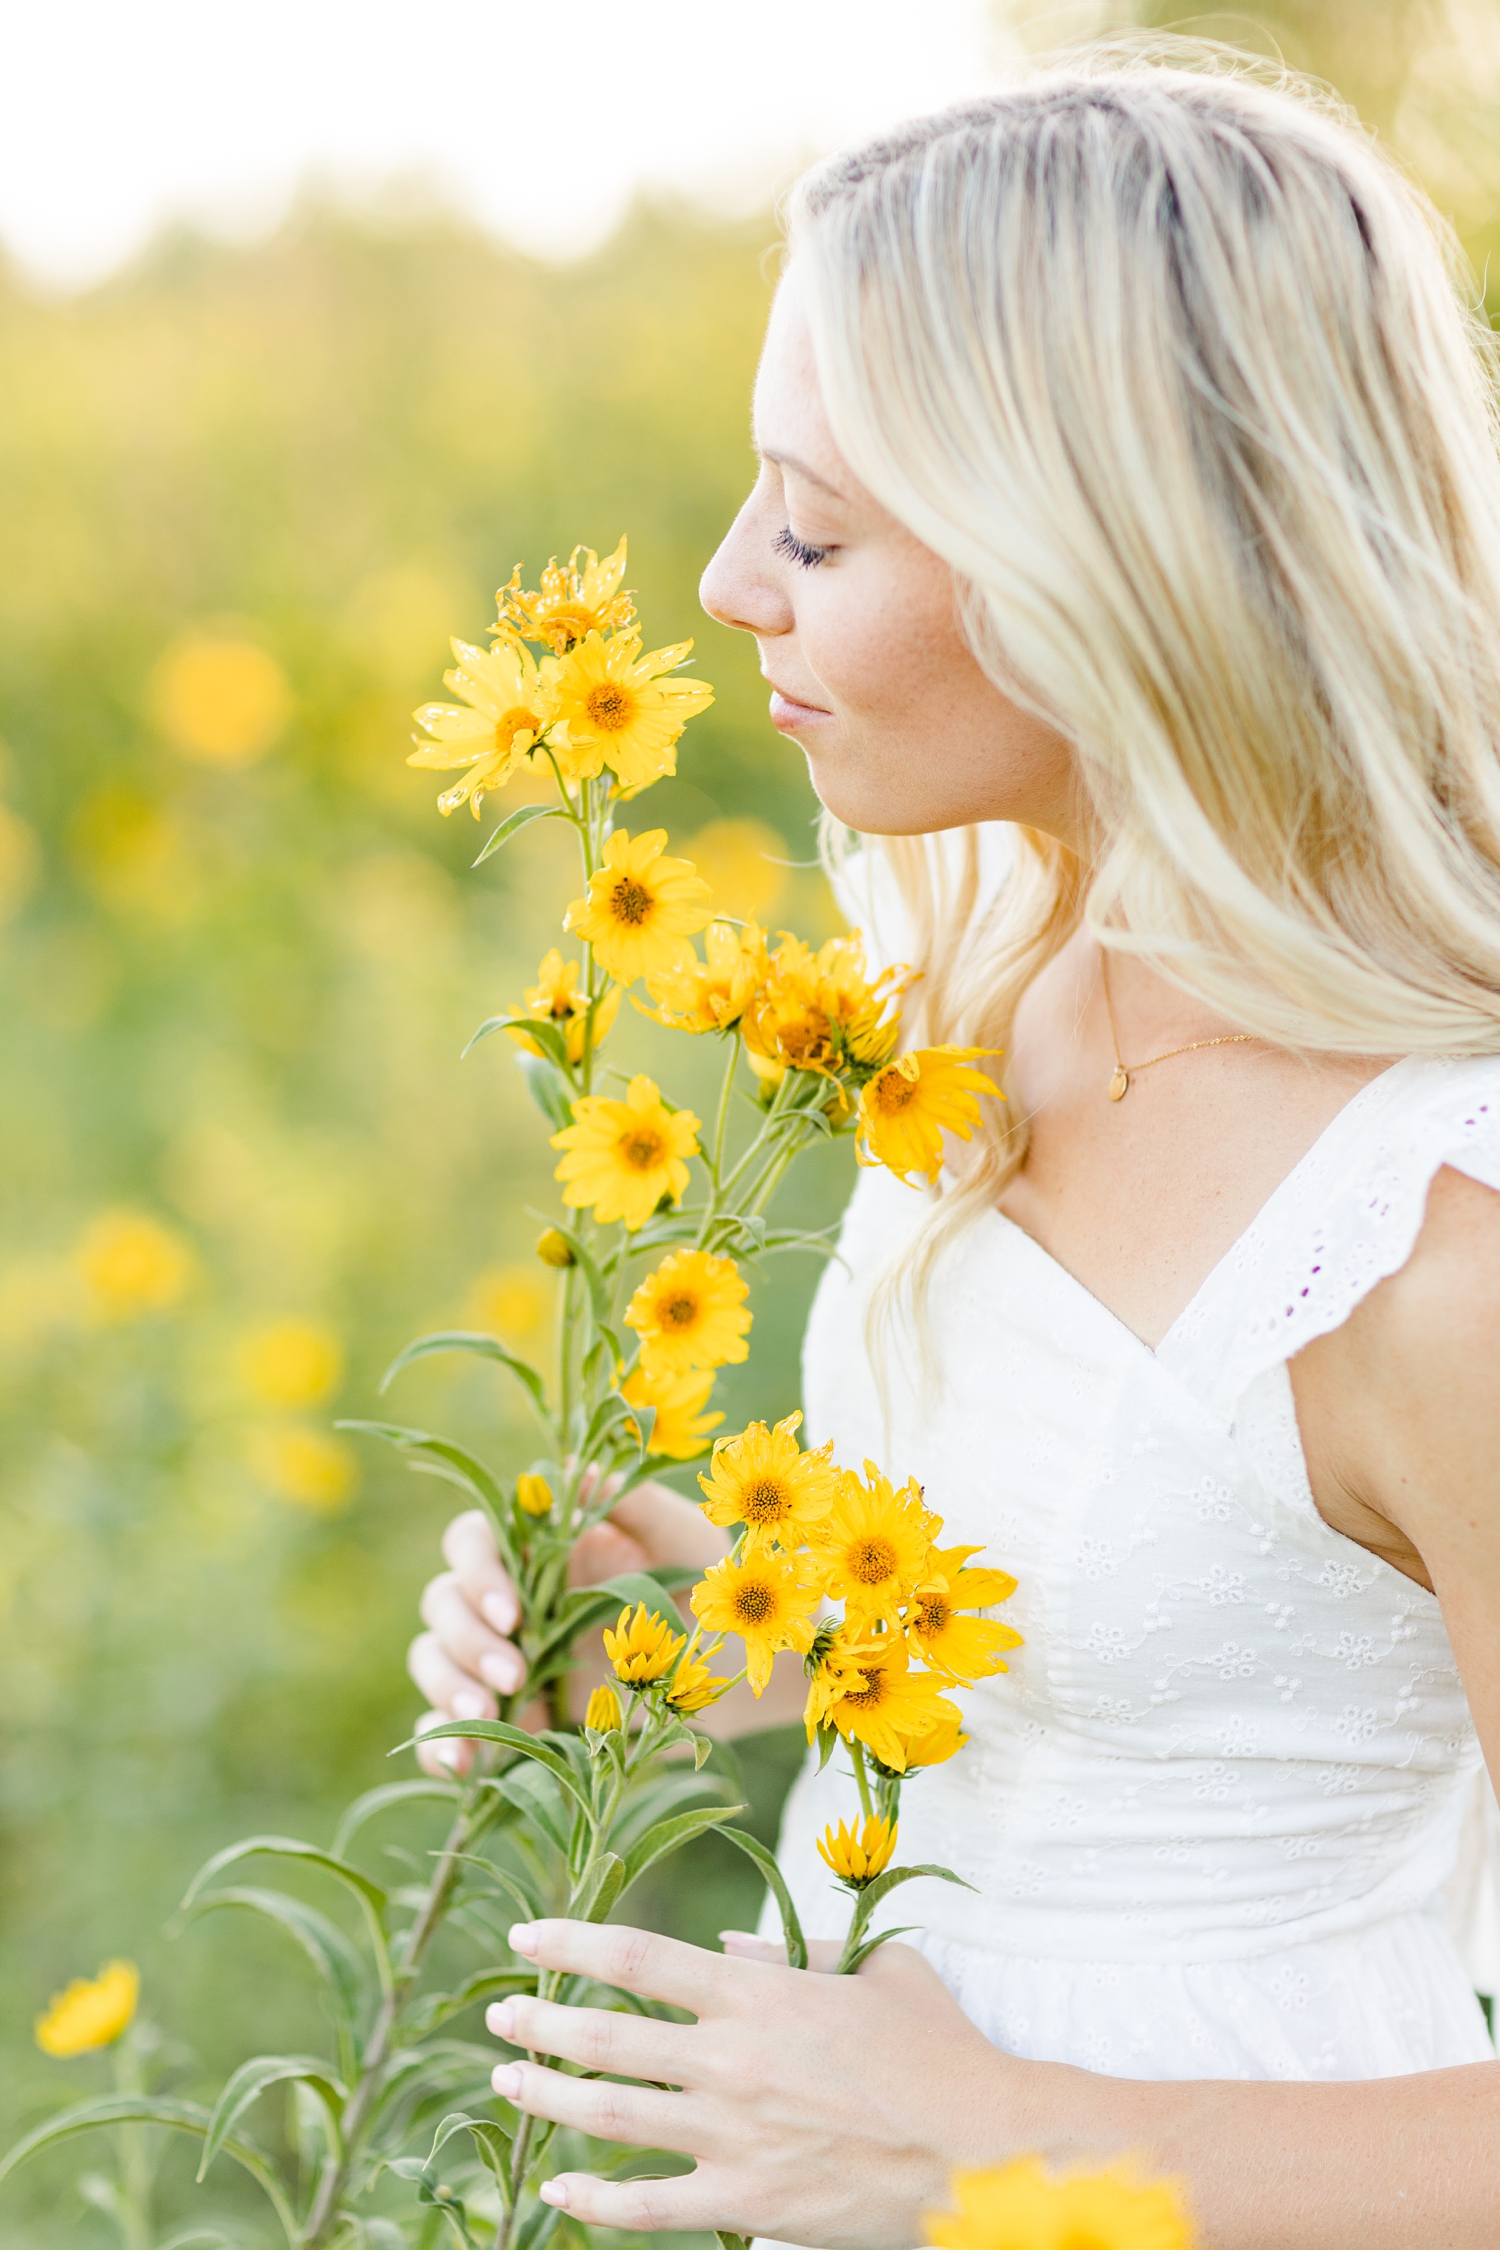 Shelby softly smells beautiful yellow flowers in a field of wildflowers | CB Studio